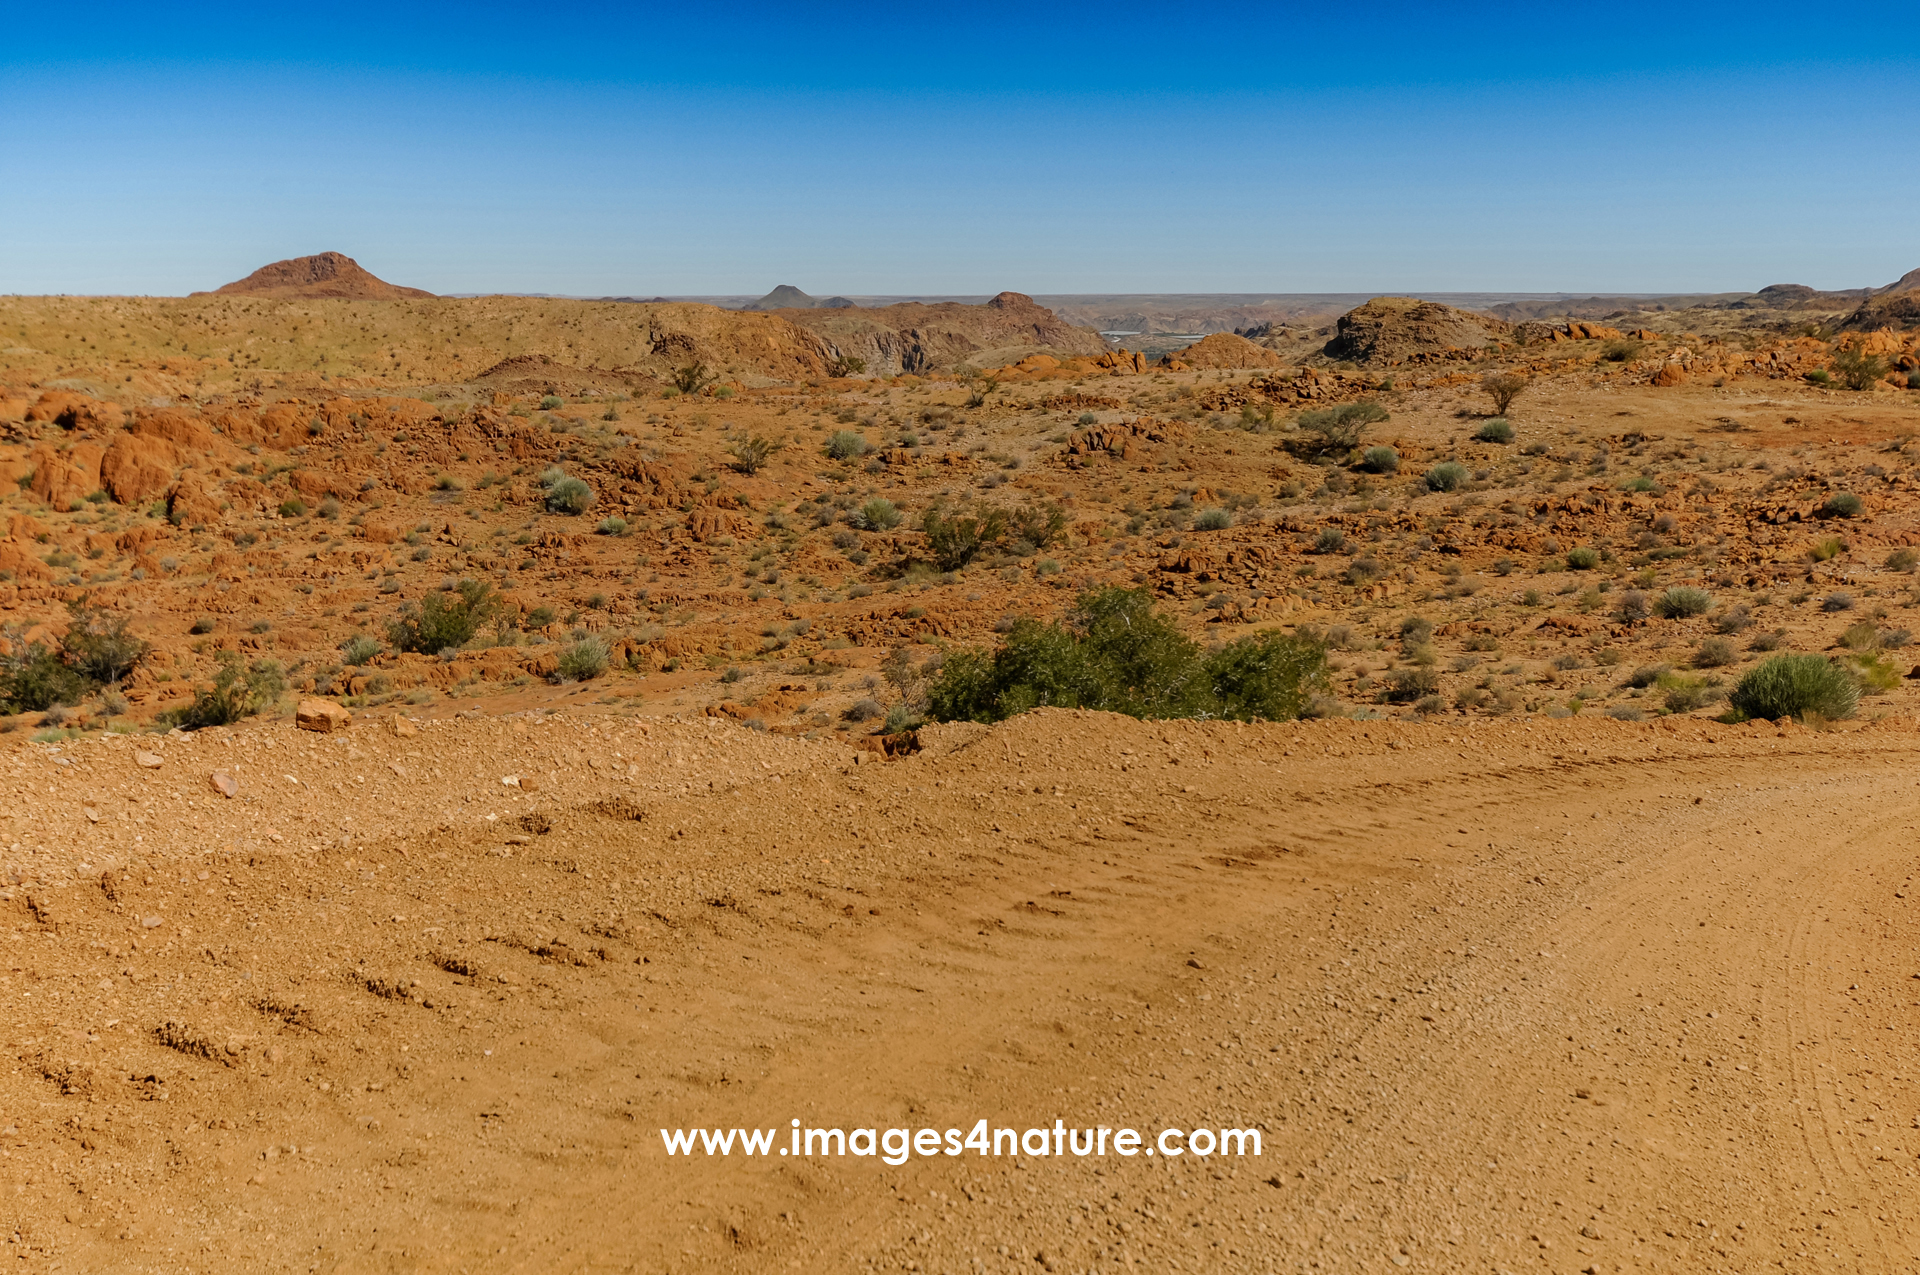 Scenic South African desert landscape with gravel road